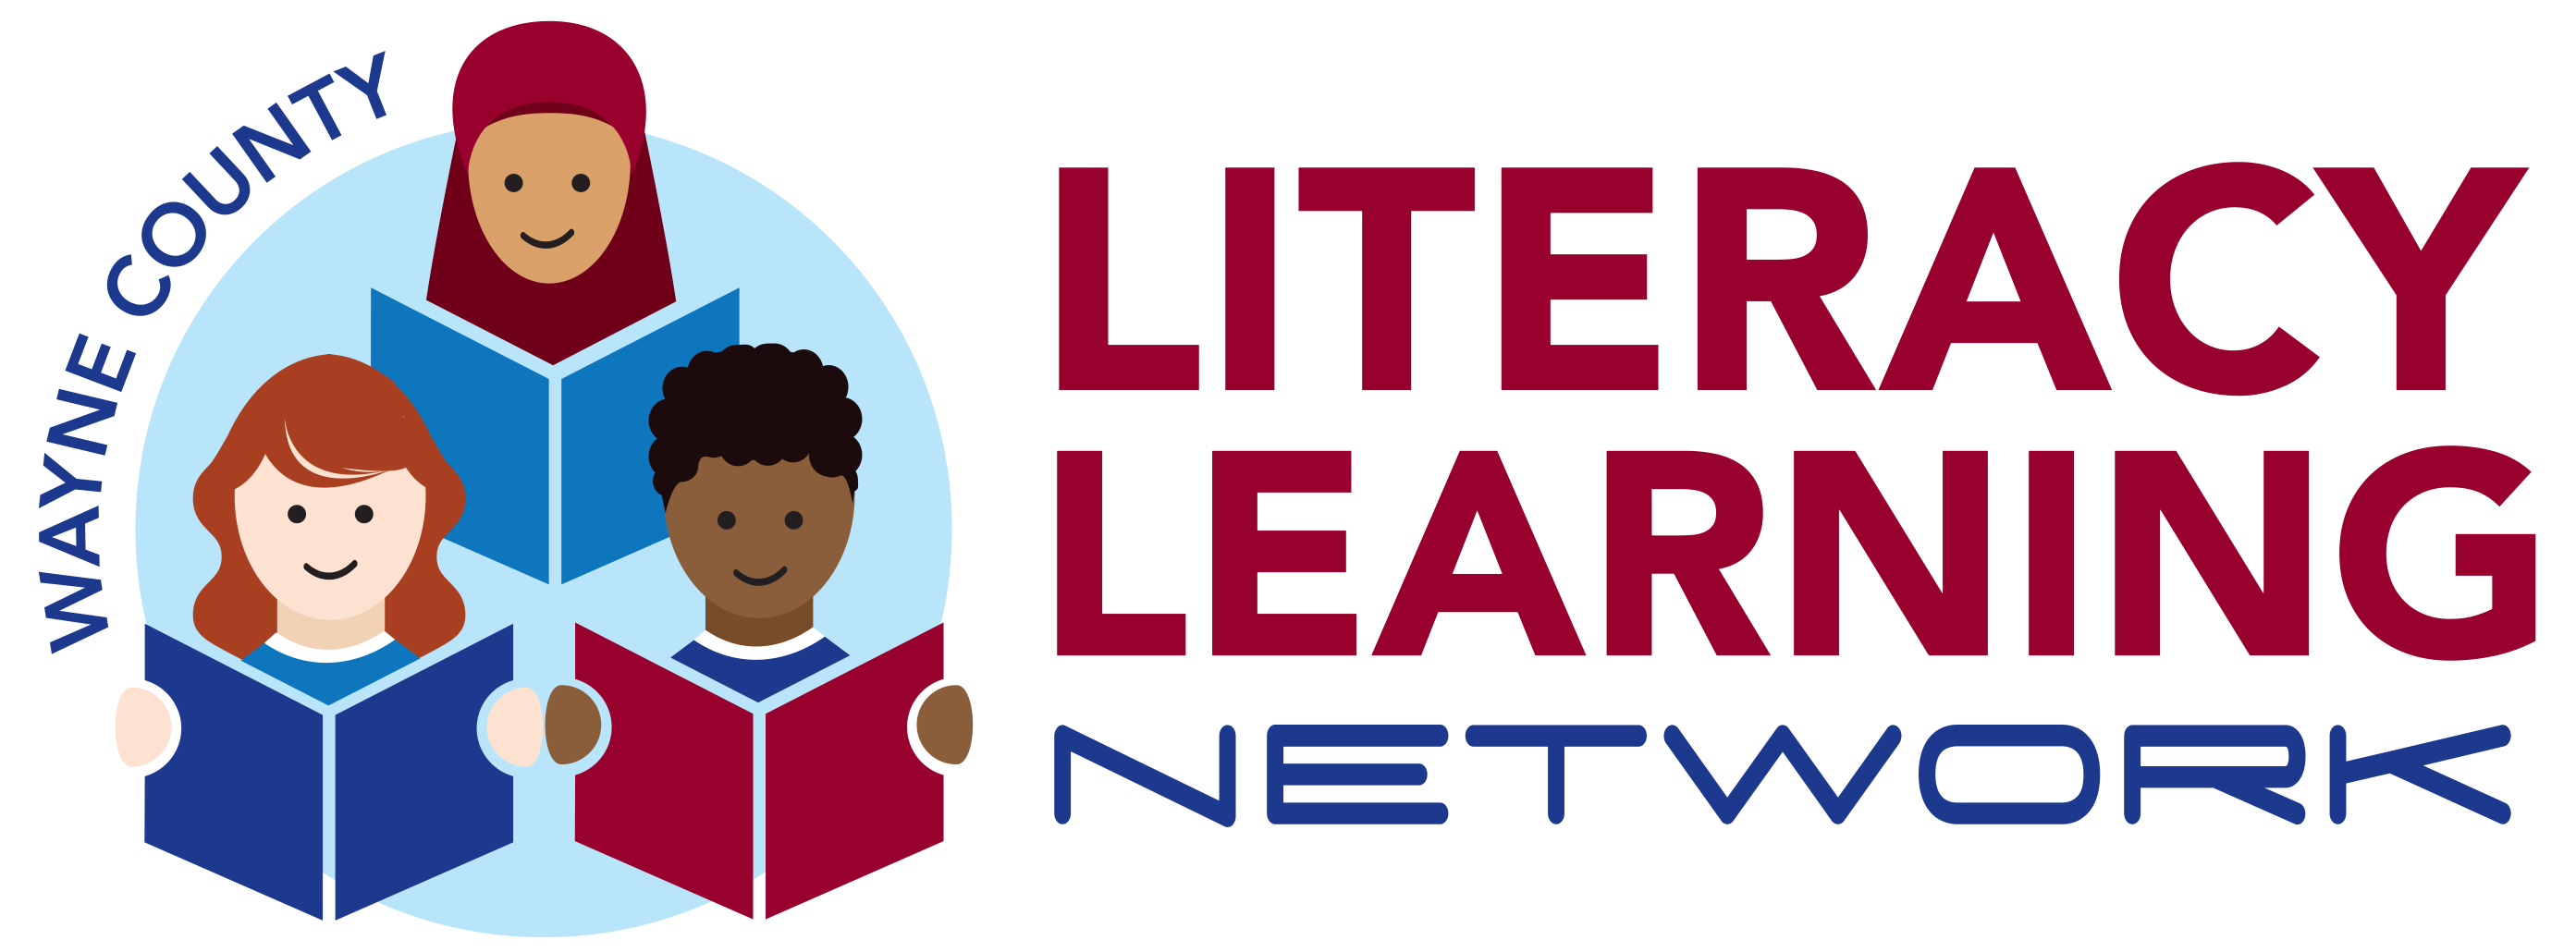 Literacy Learning Network logo with children reading books.